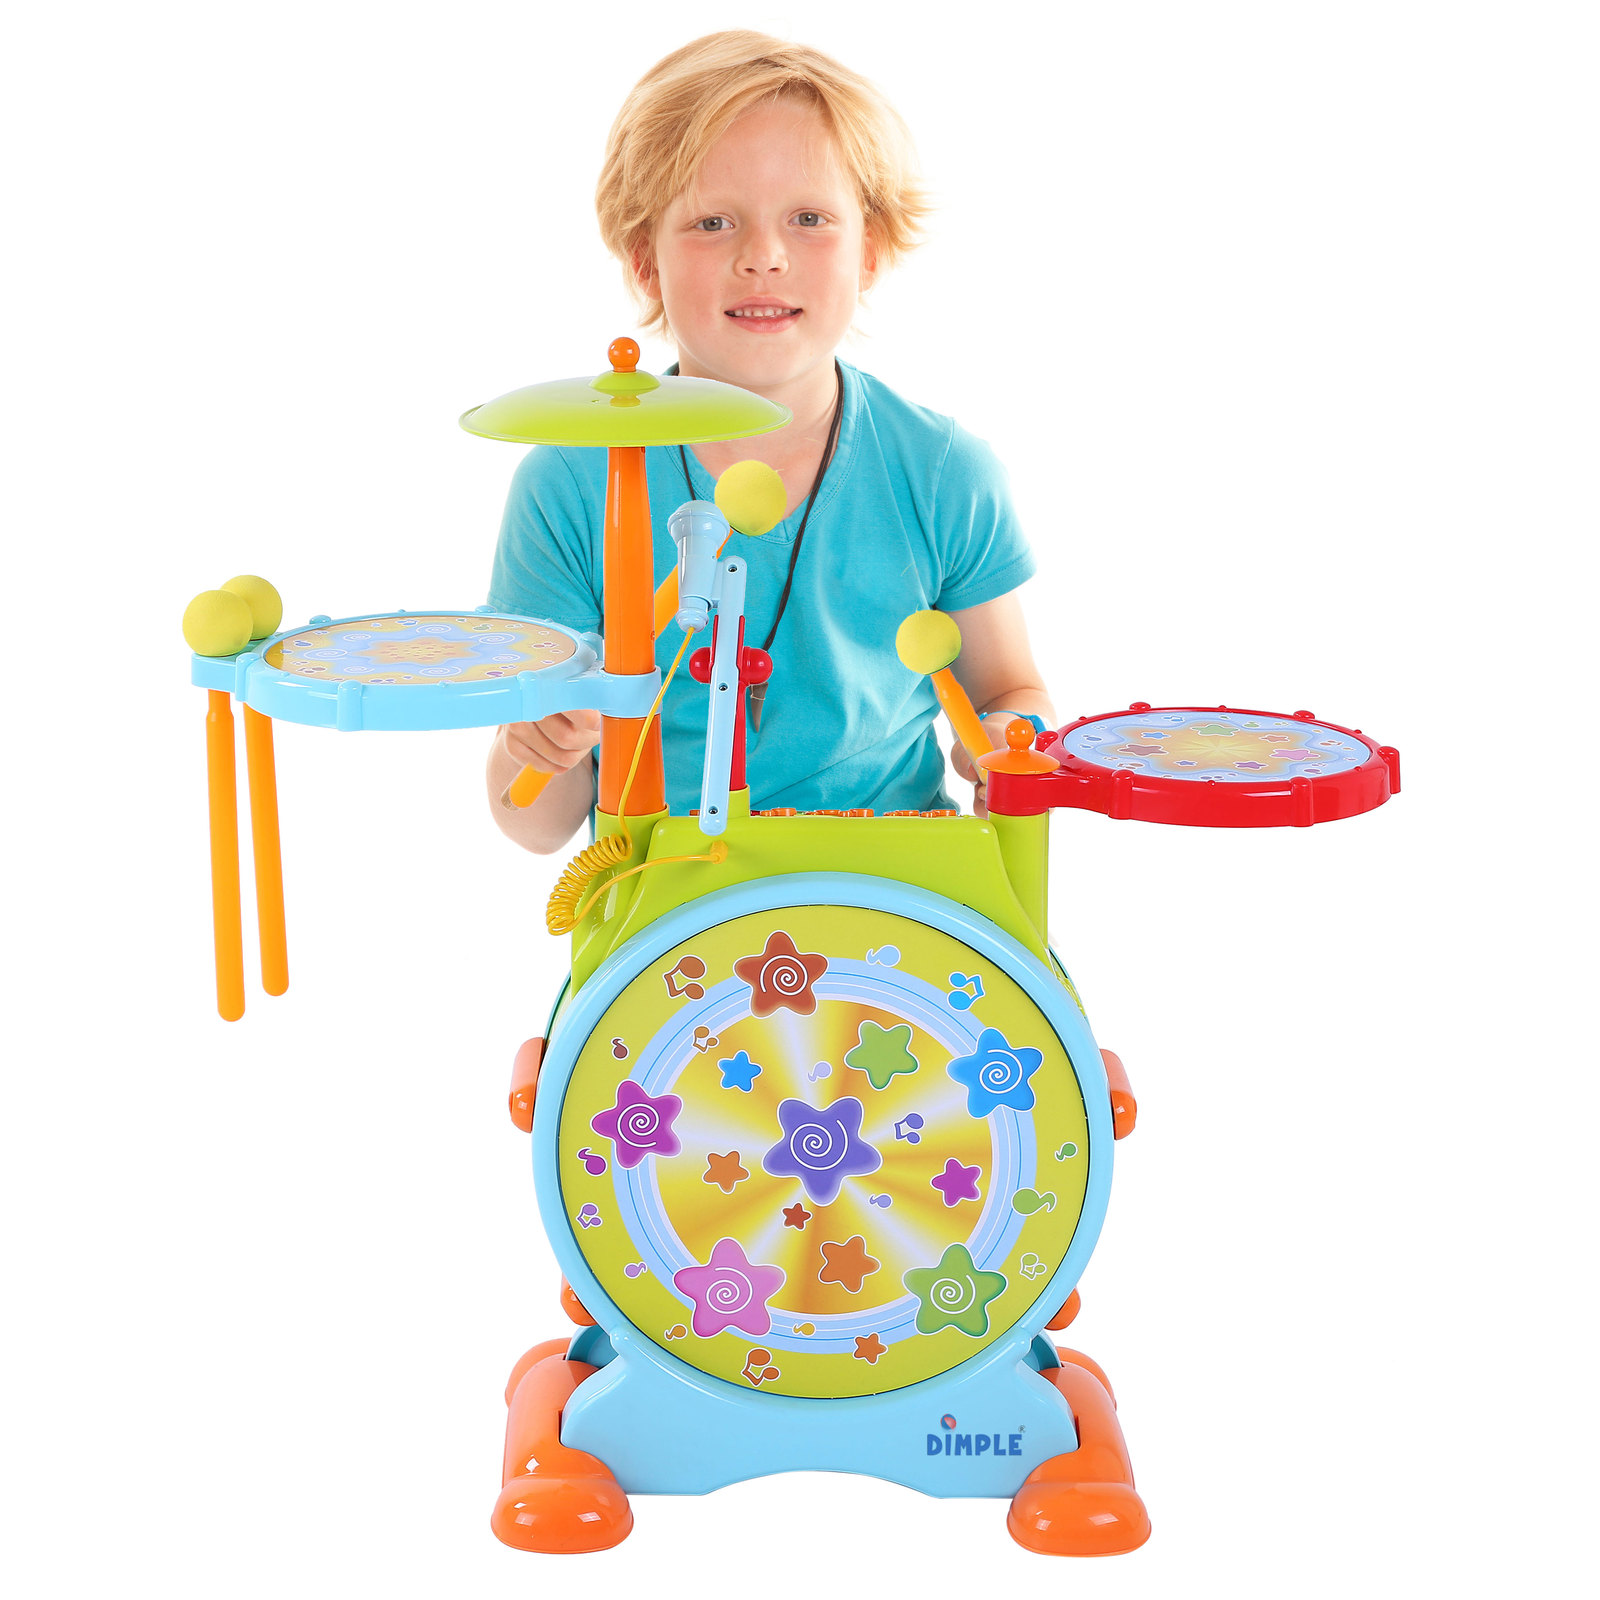 Dimple Electric Big Toy Drum Set with Microphone Pedal & Stool Gift For Kids